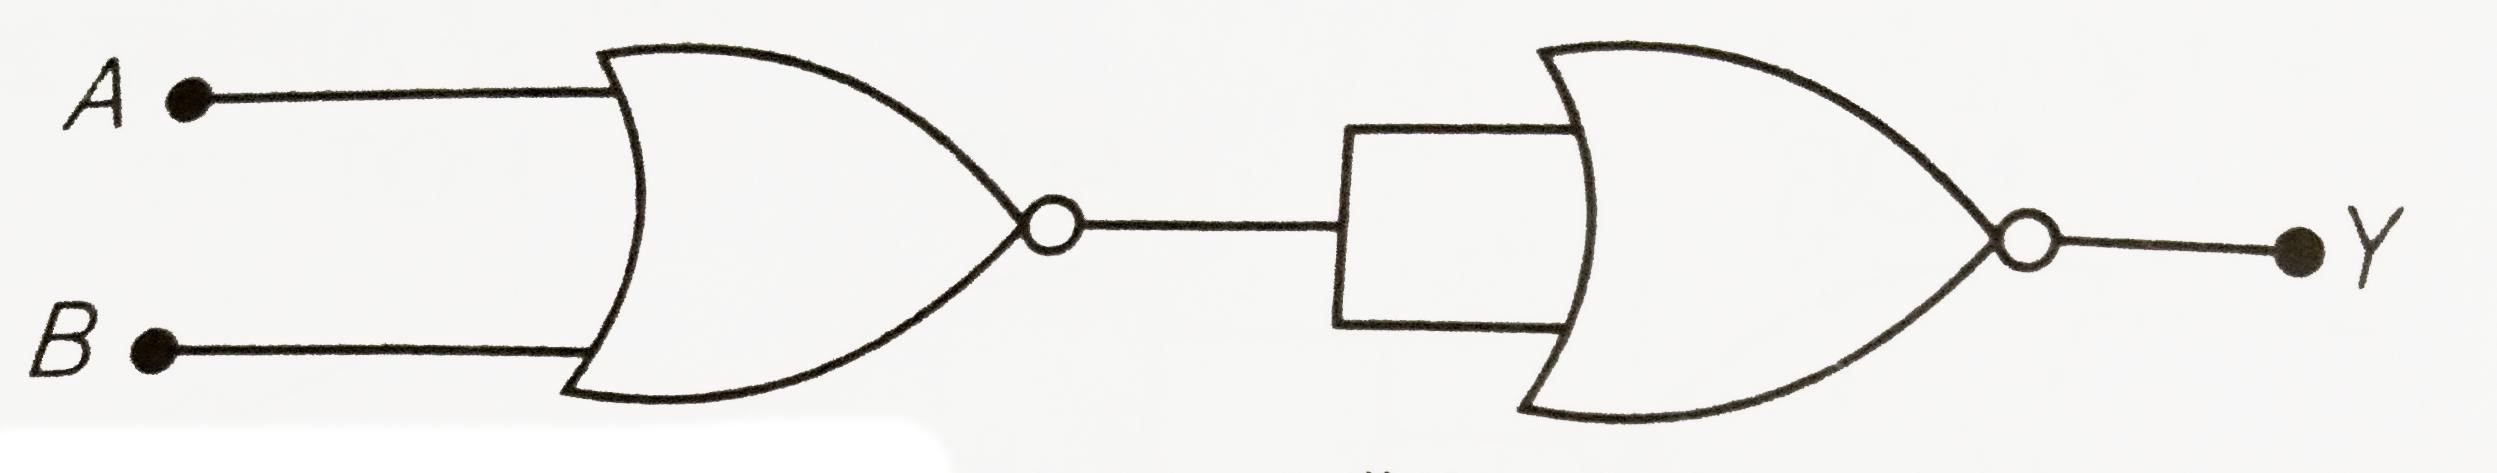 In the following circuit, the output Y for all possible inputs A and B is expressed by the truth table